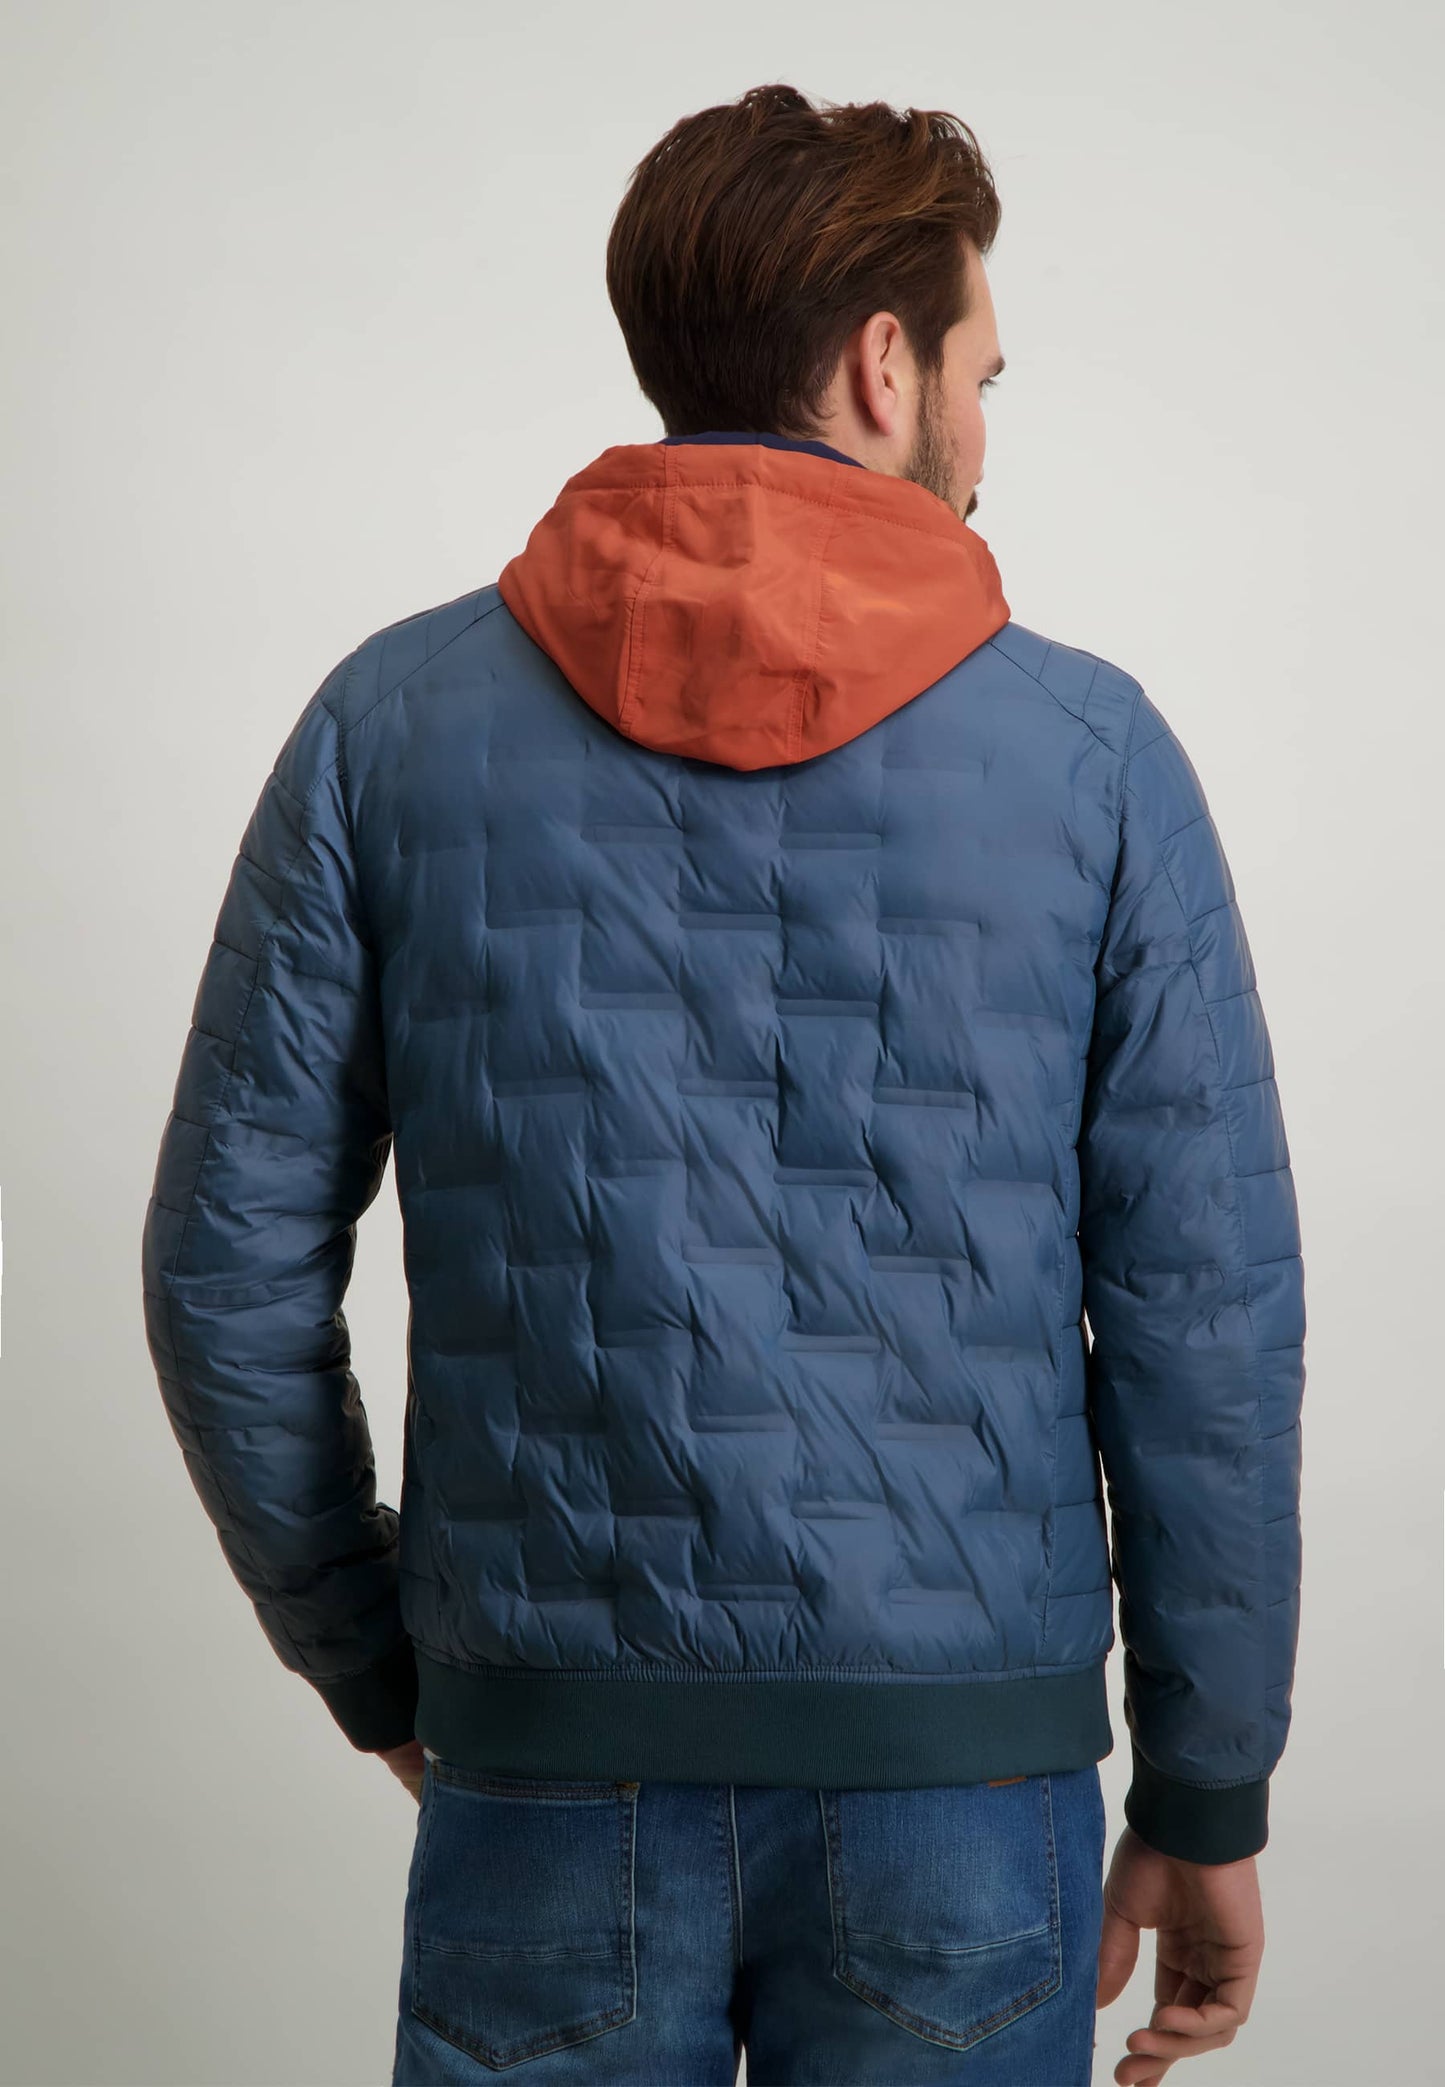 Blue outdoor jacket State of Art - 12858/5600